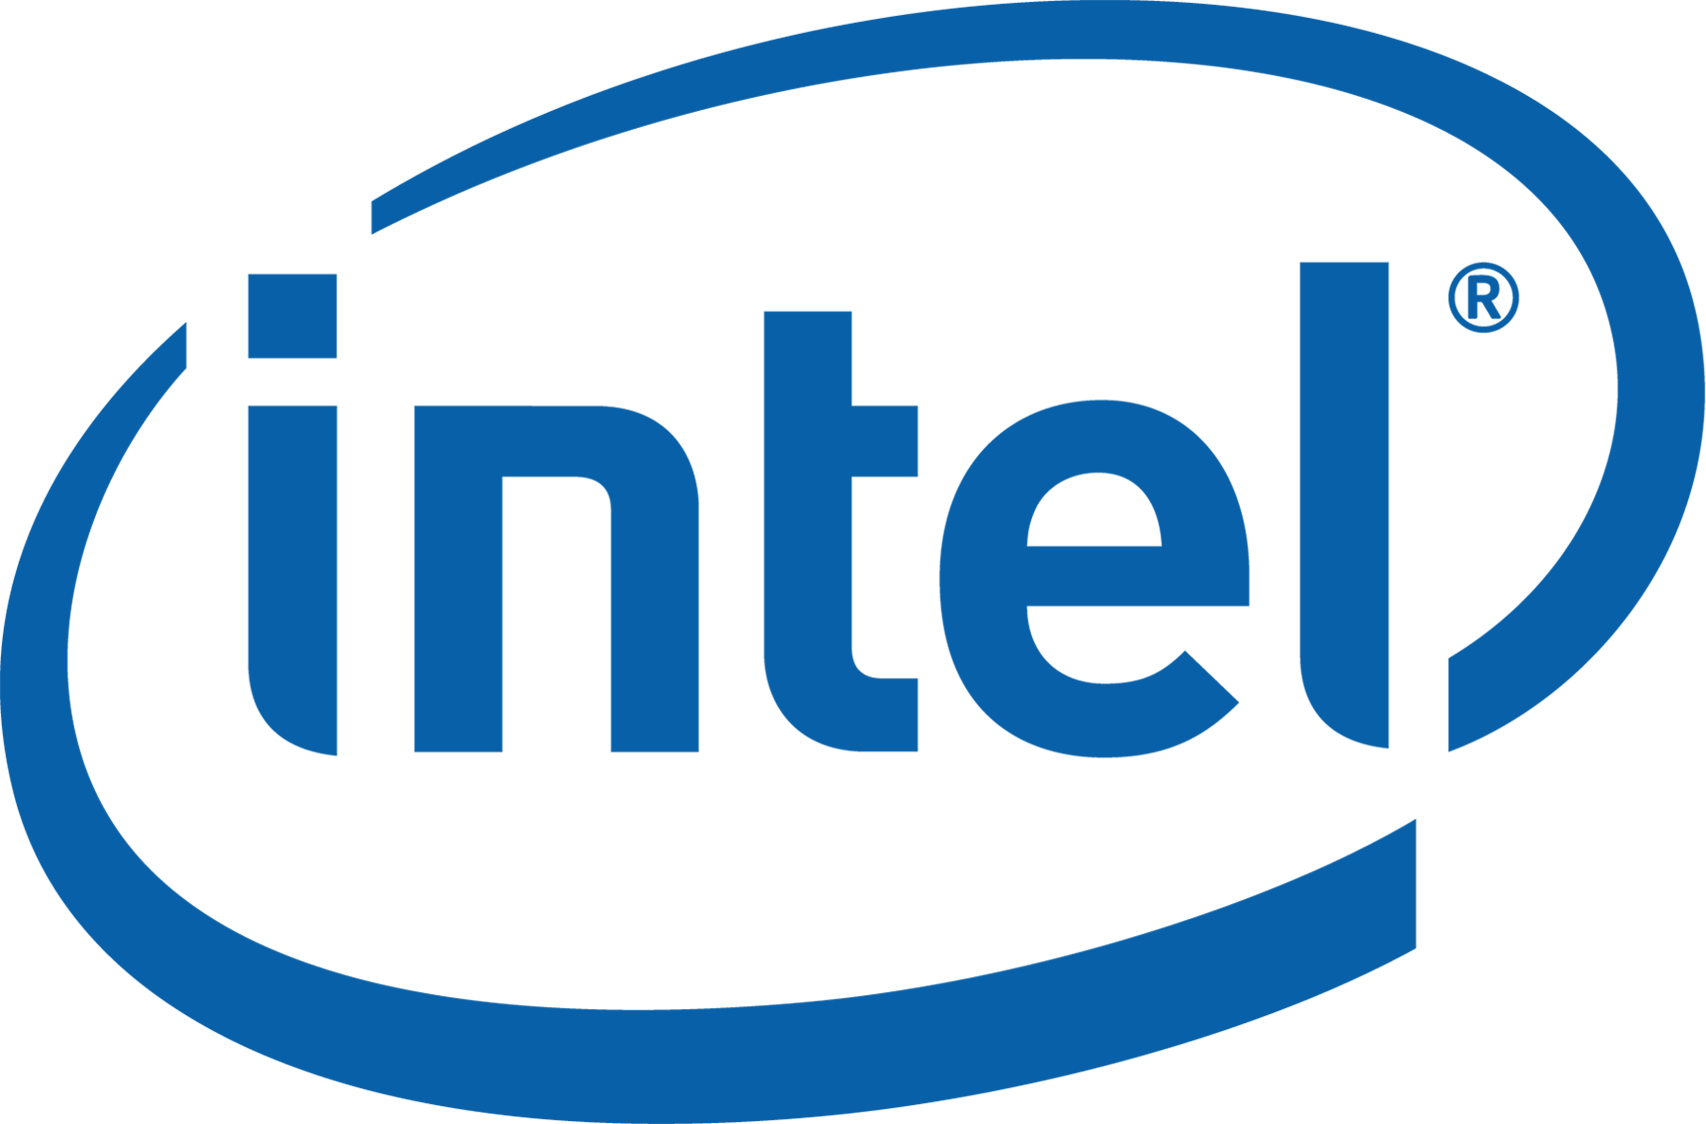 PRODUCT MANAGER, Intel (2016 - 2018)